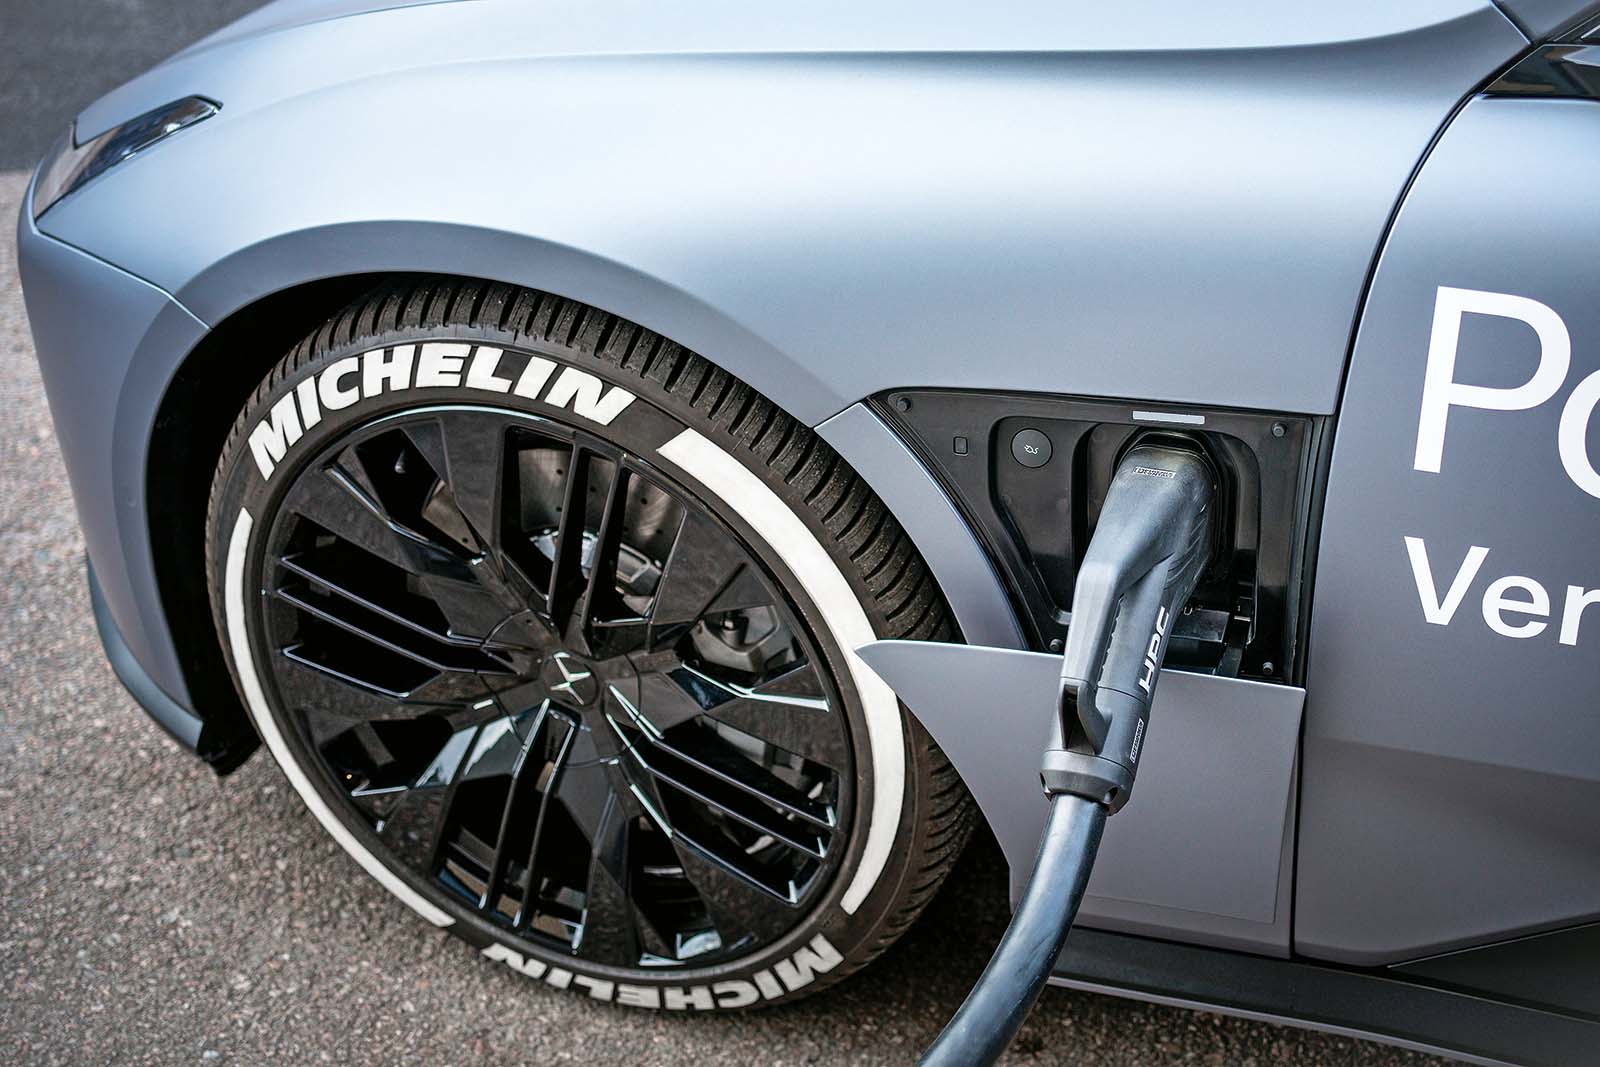 How to halve typical EV charging times with no extra cost